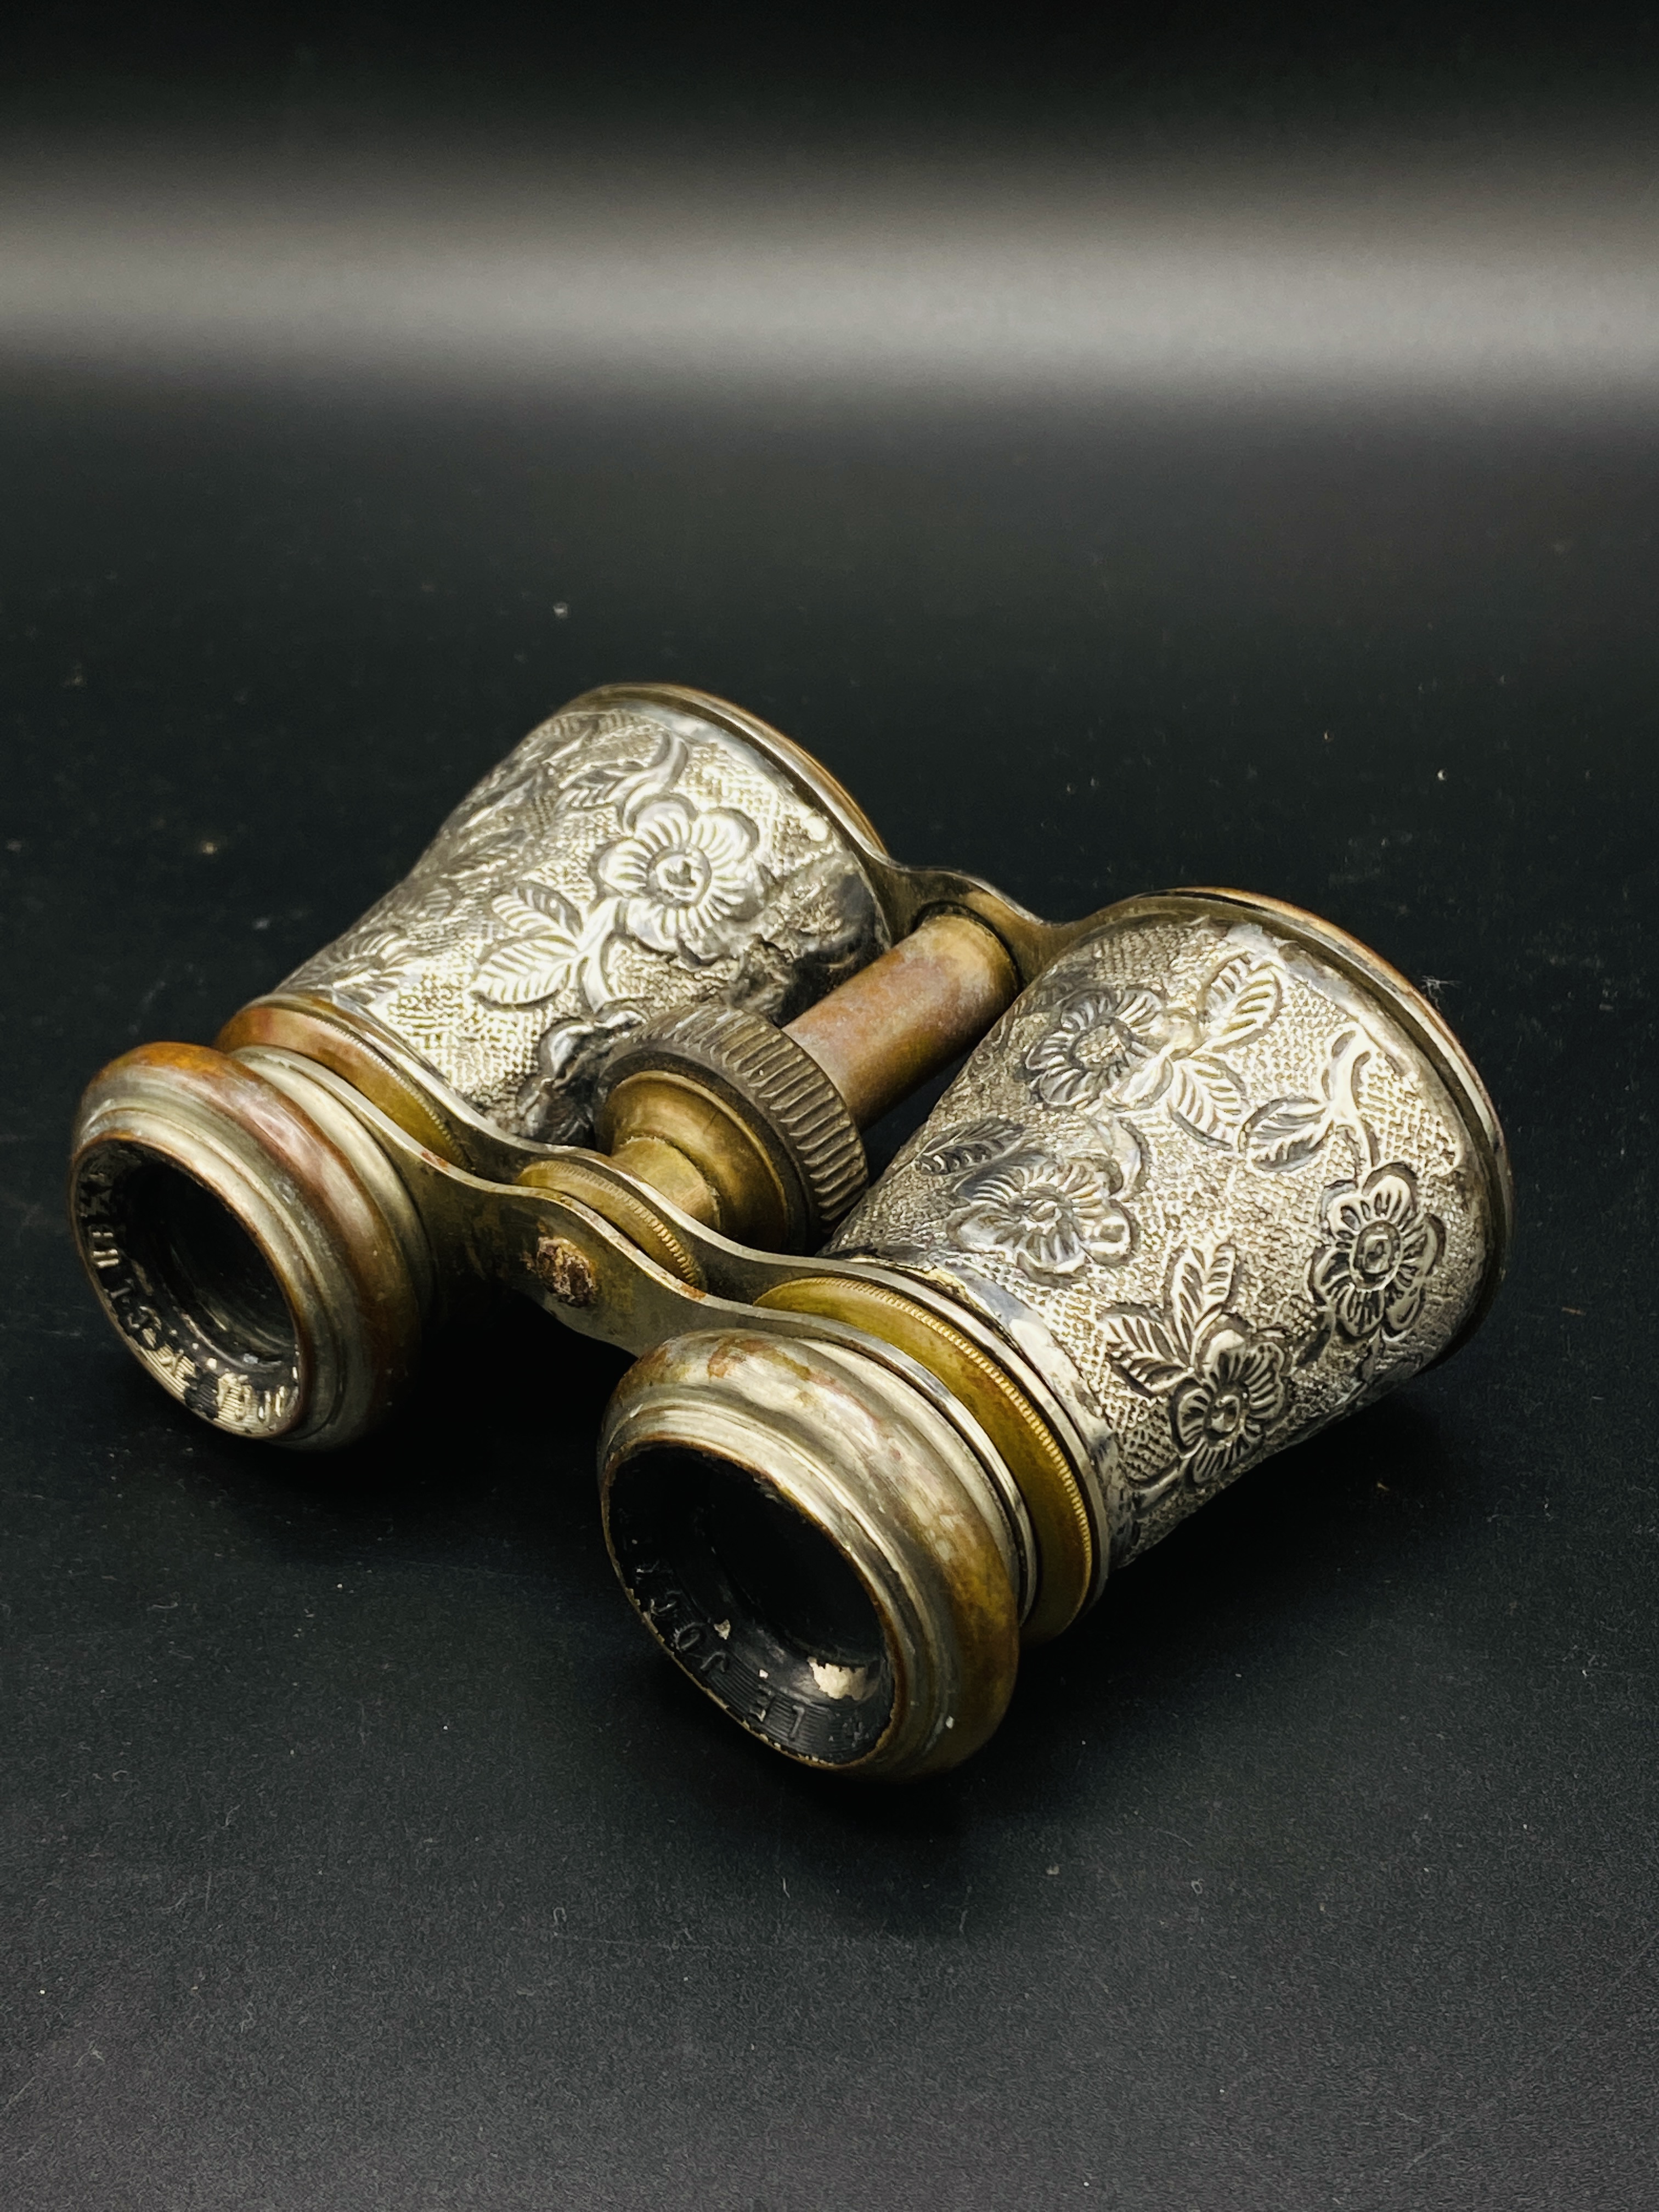 A pair of Victorian cut glass spill vases with silver rims and a pair of silver cased opera glasses - Image 3 of 4